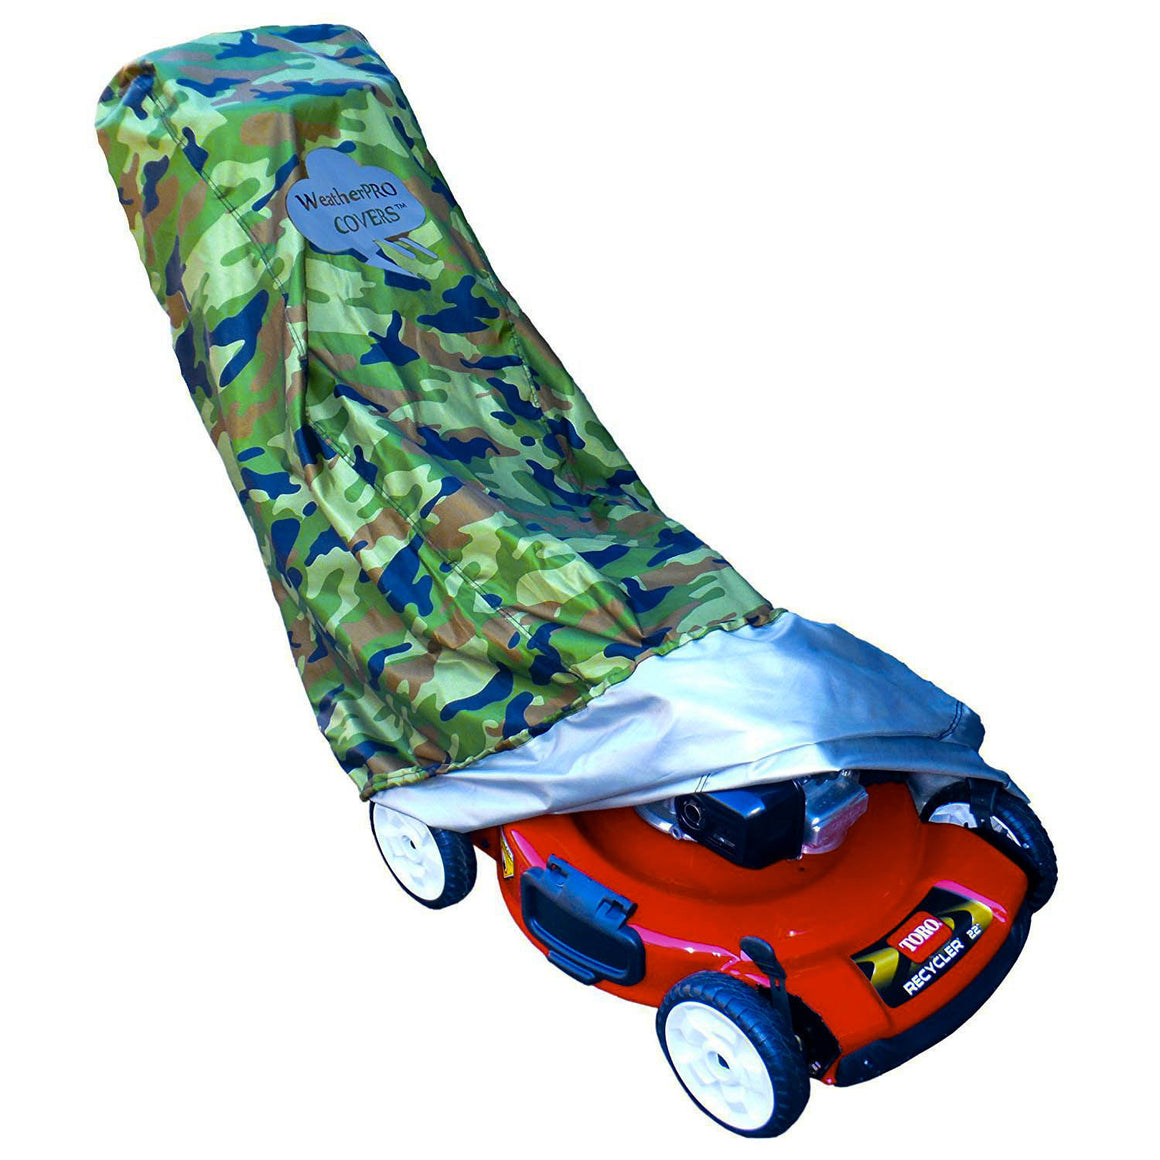 WeatherPRO Lawn Mower Cover - Camouflage - WeatherPRO Cover,   - Lawn Mower Cover